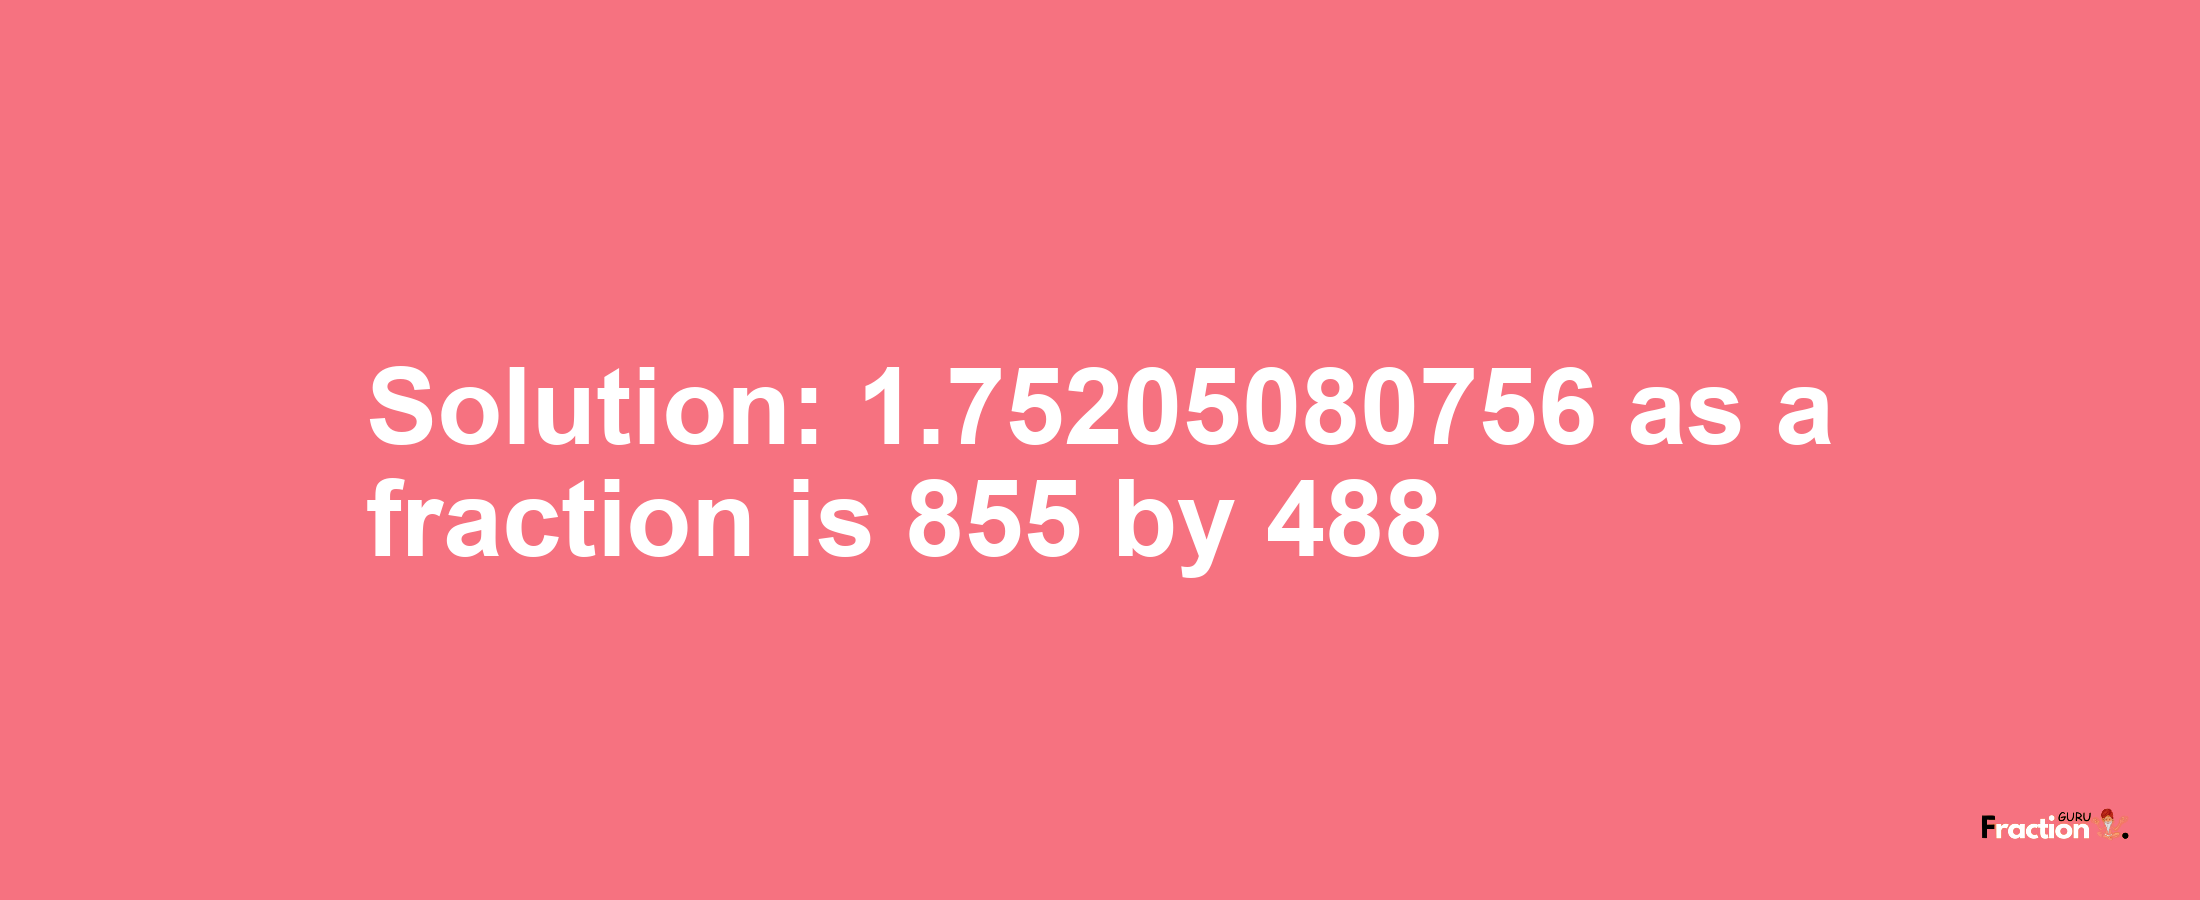 Solution:1.75205080756 as a fraction is 855/488